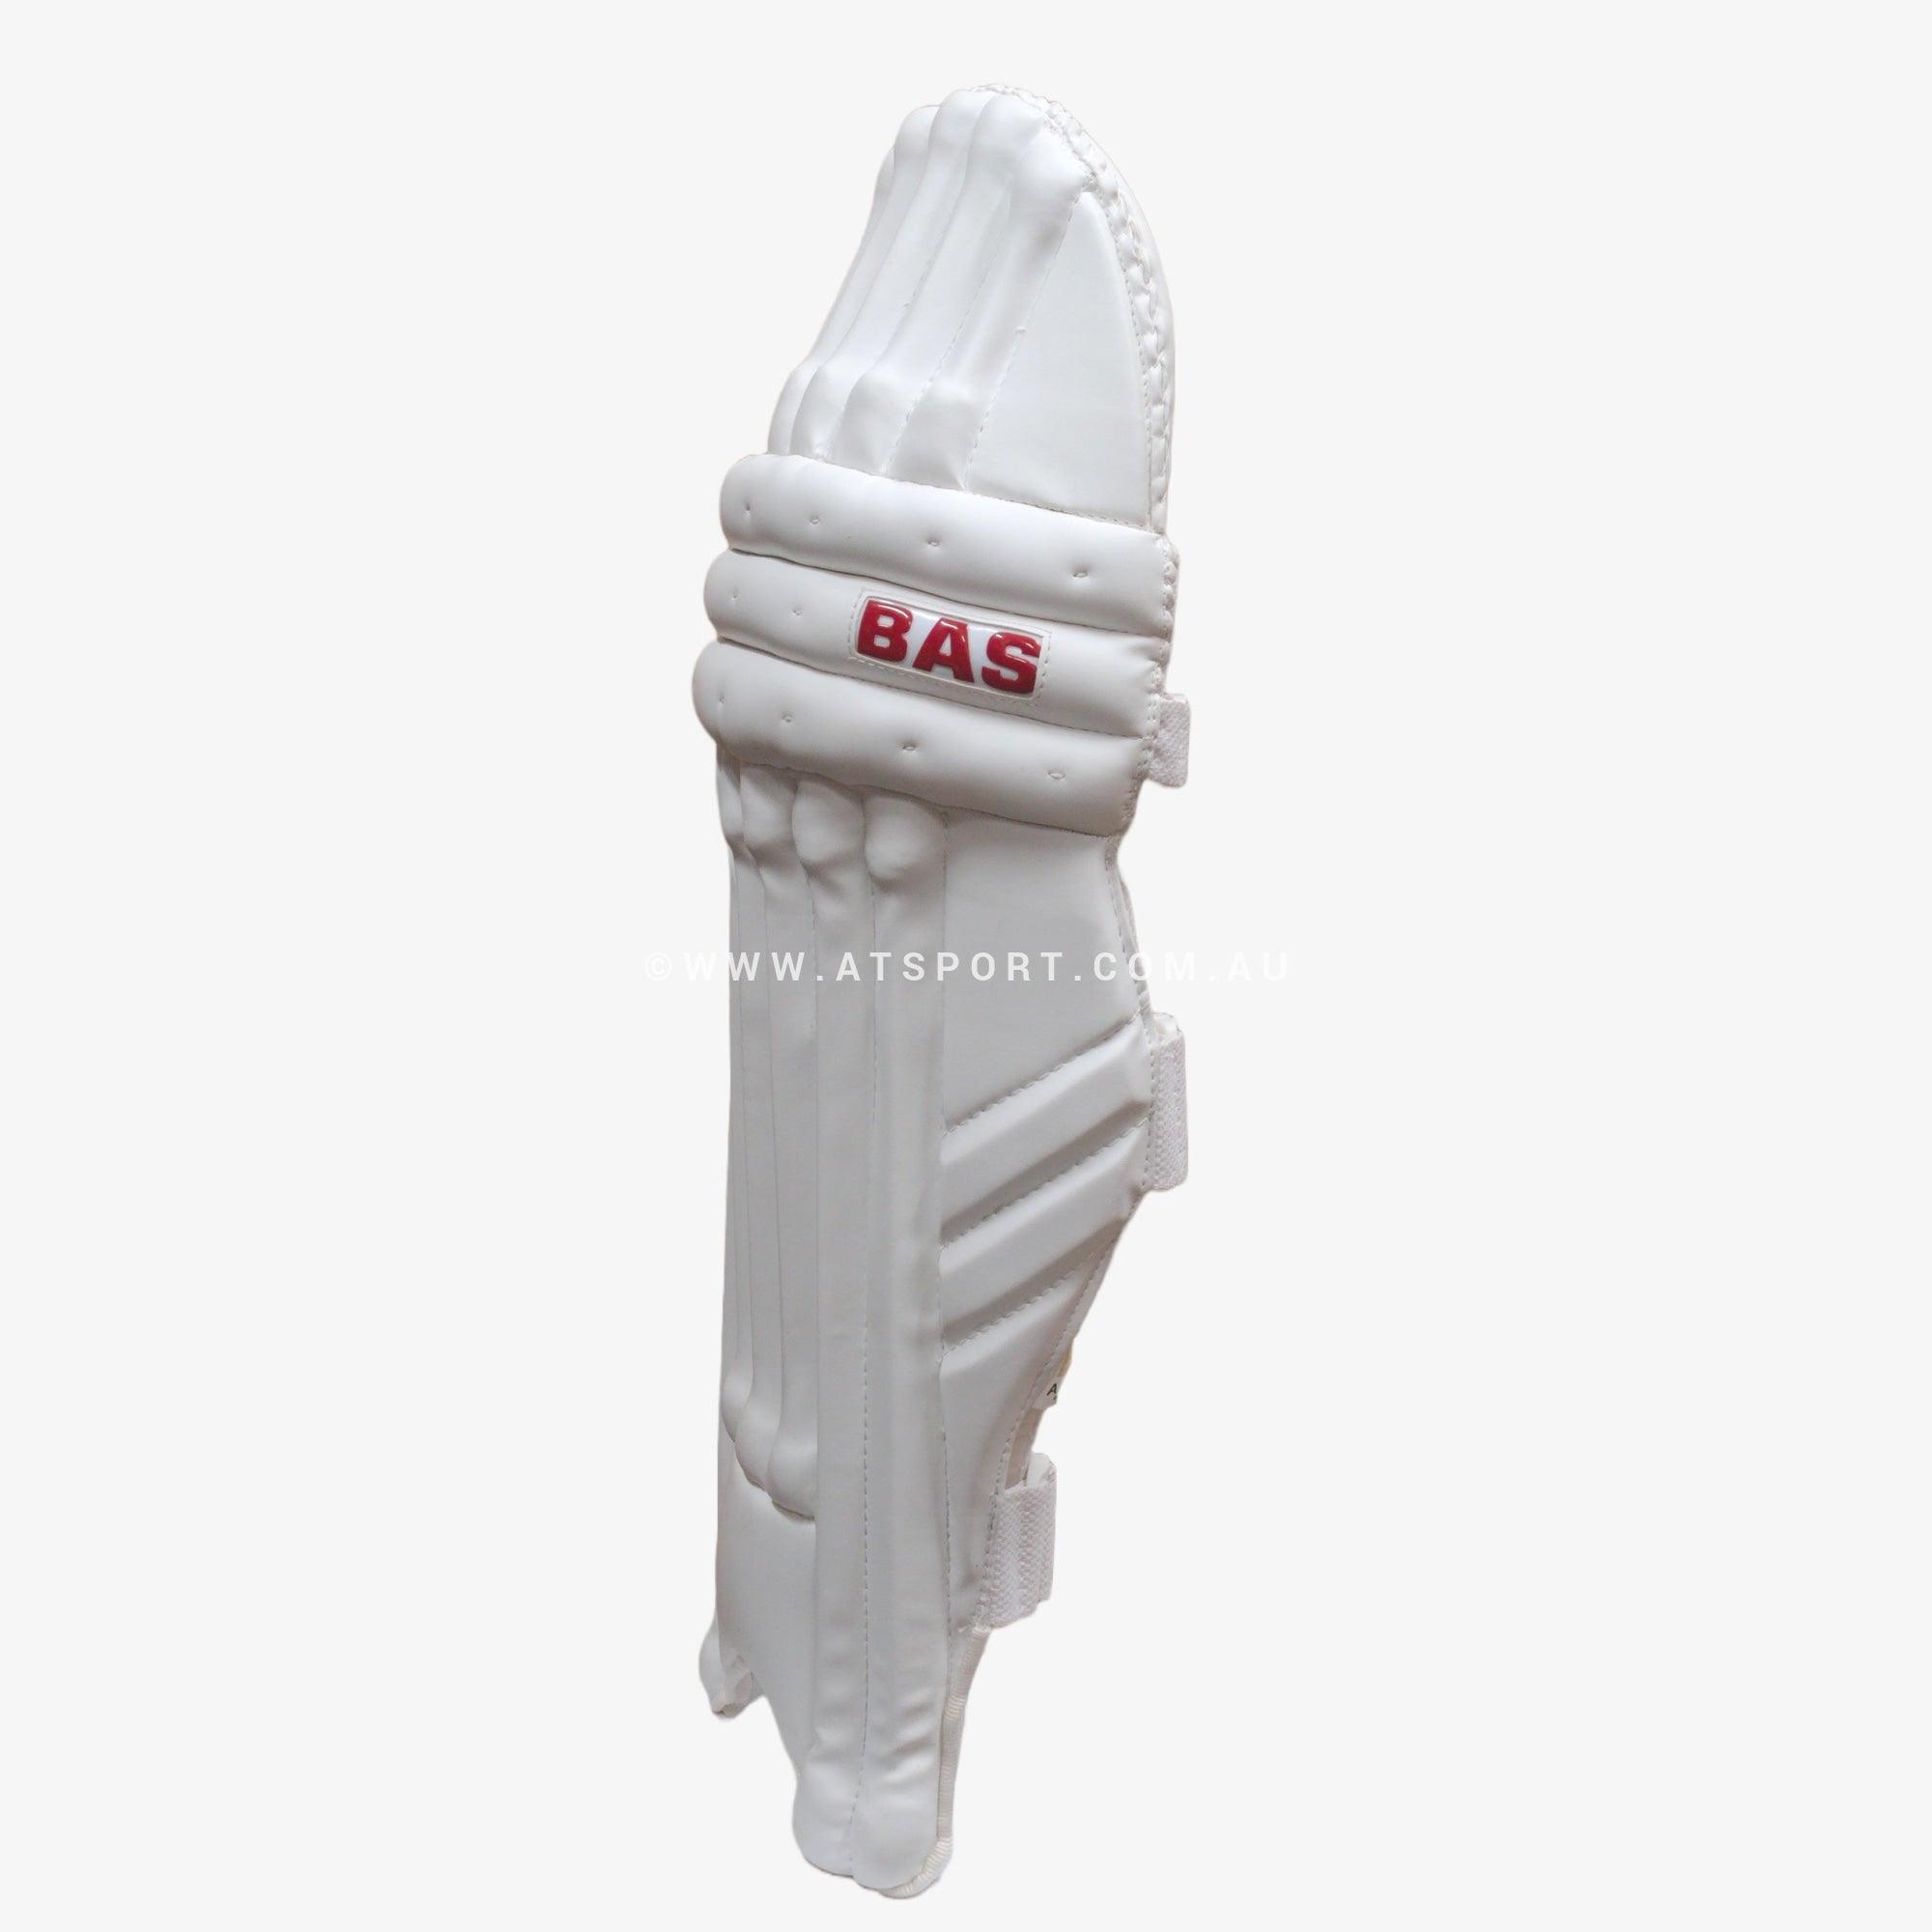 BAS Vintage Classic Cricket Batting Pads - ADULT - AT Sports